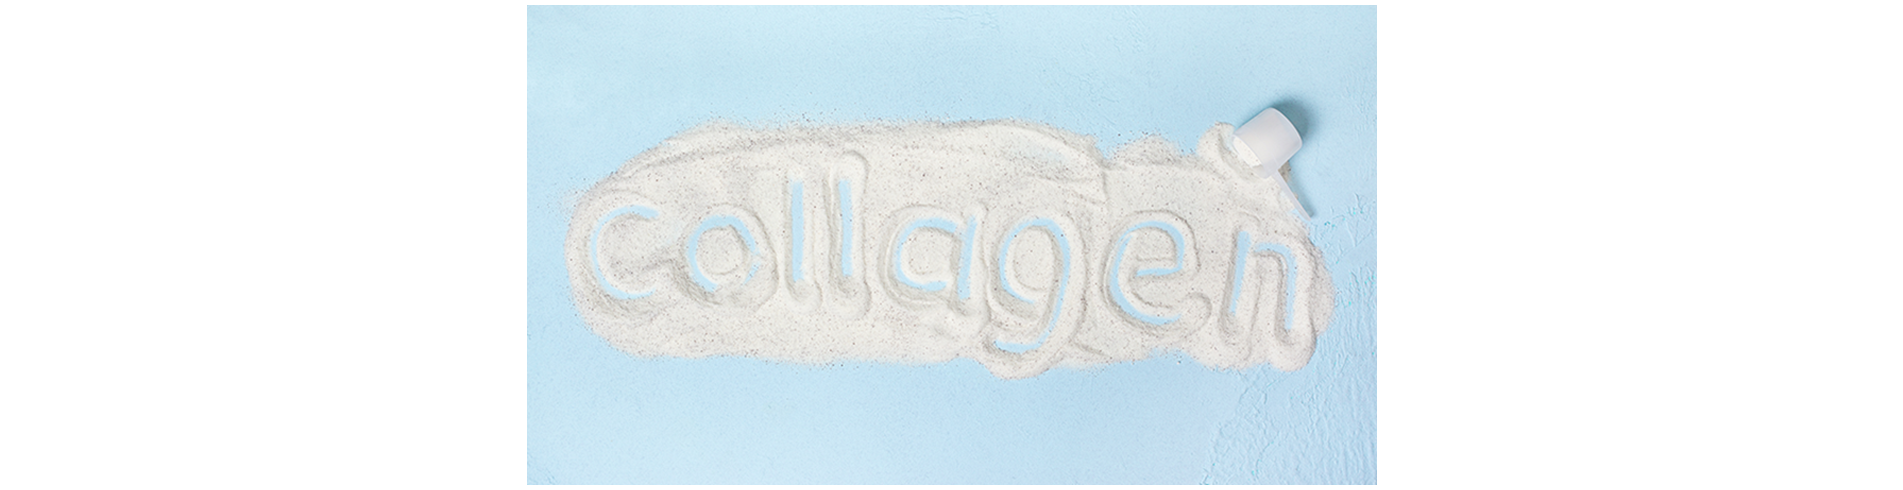 Collagen How-To – An Insider’s Guide to Collagen Building